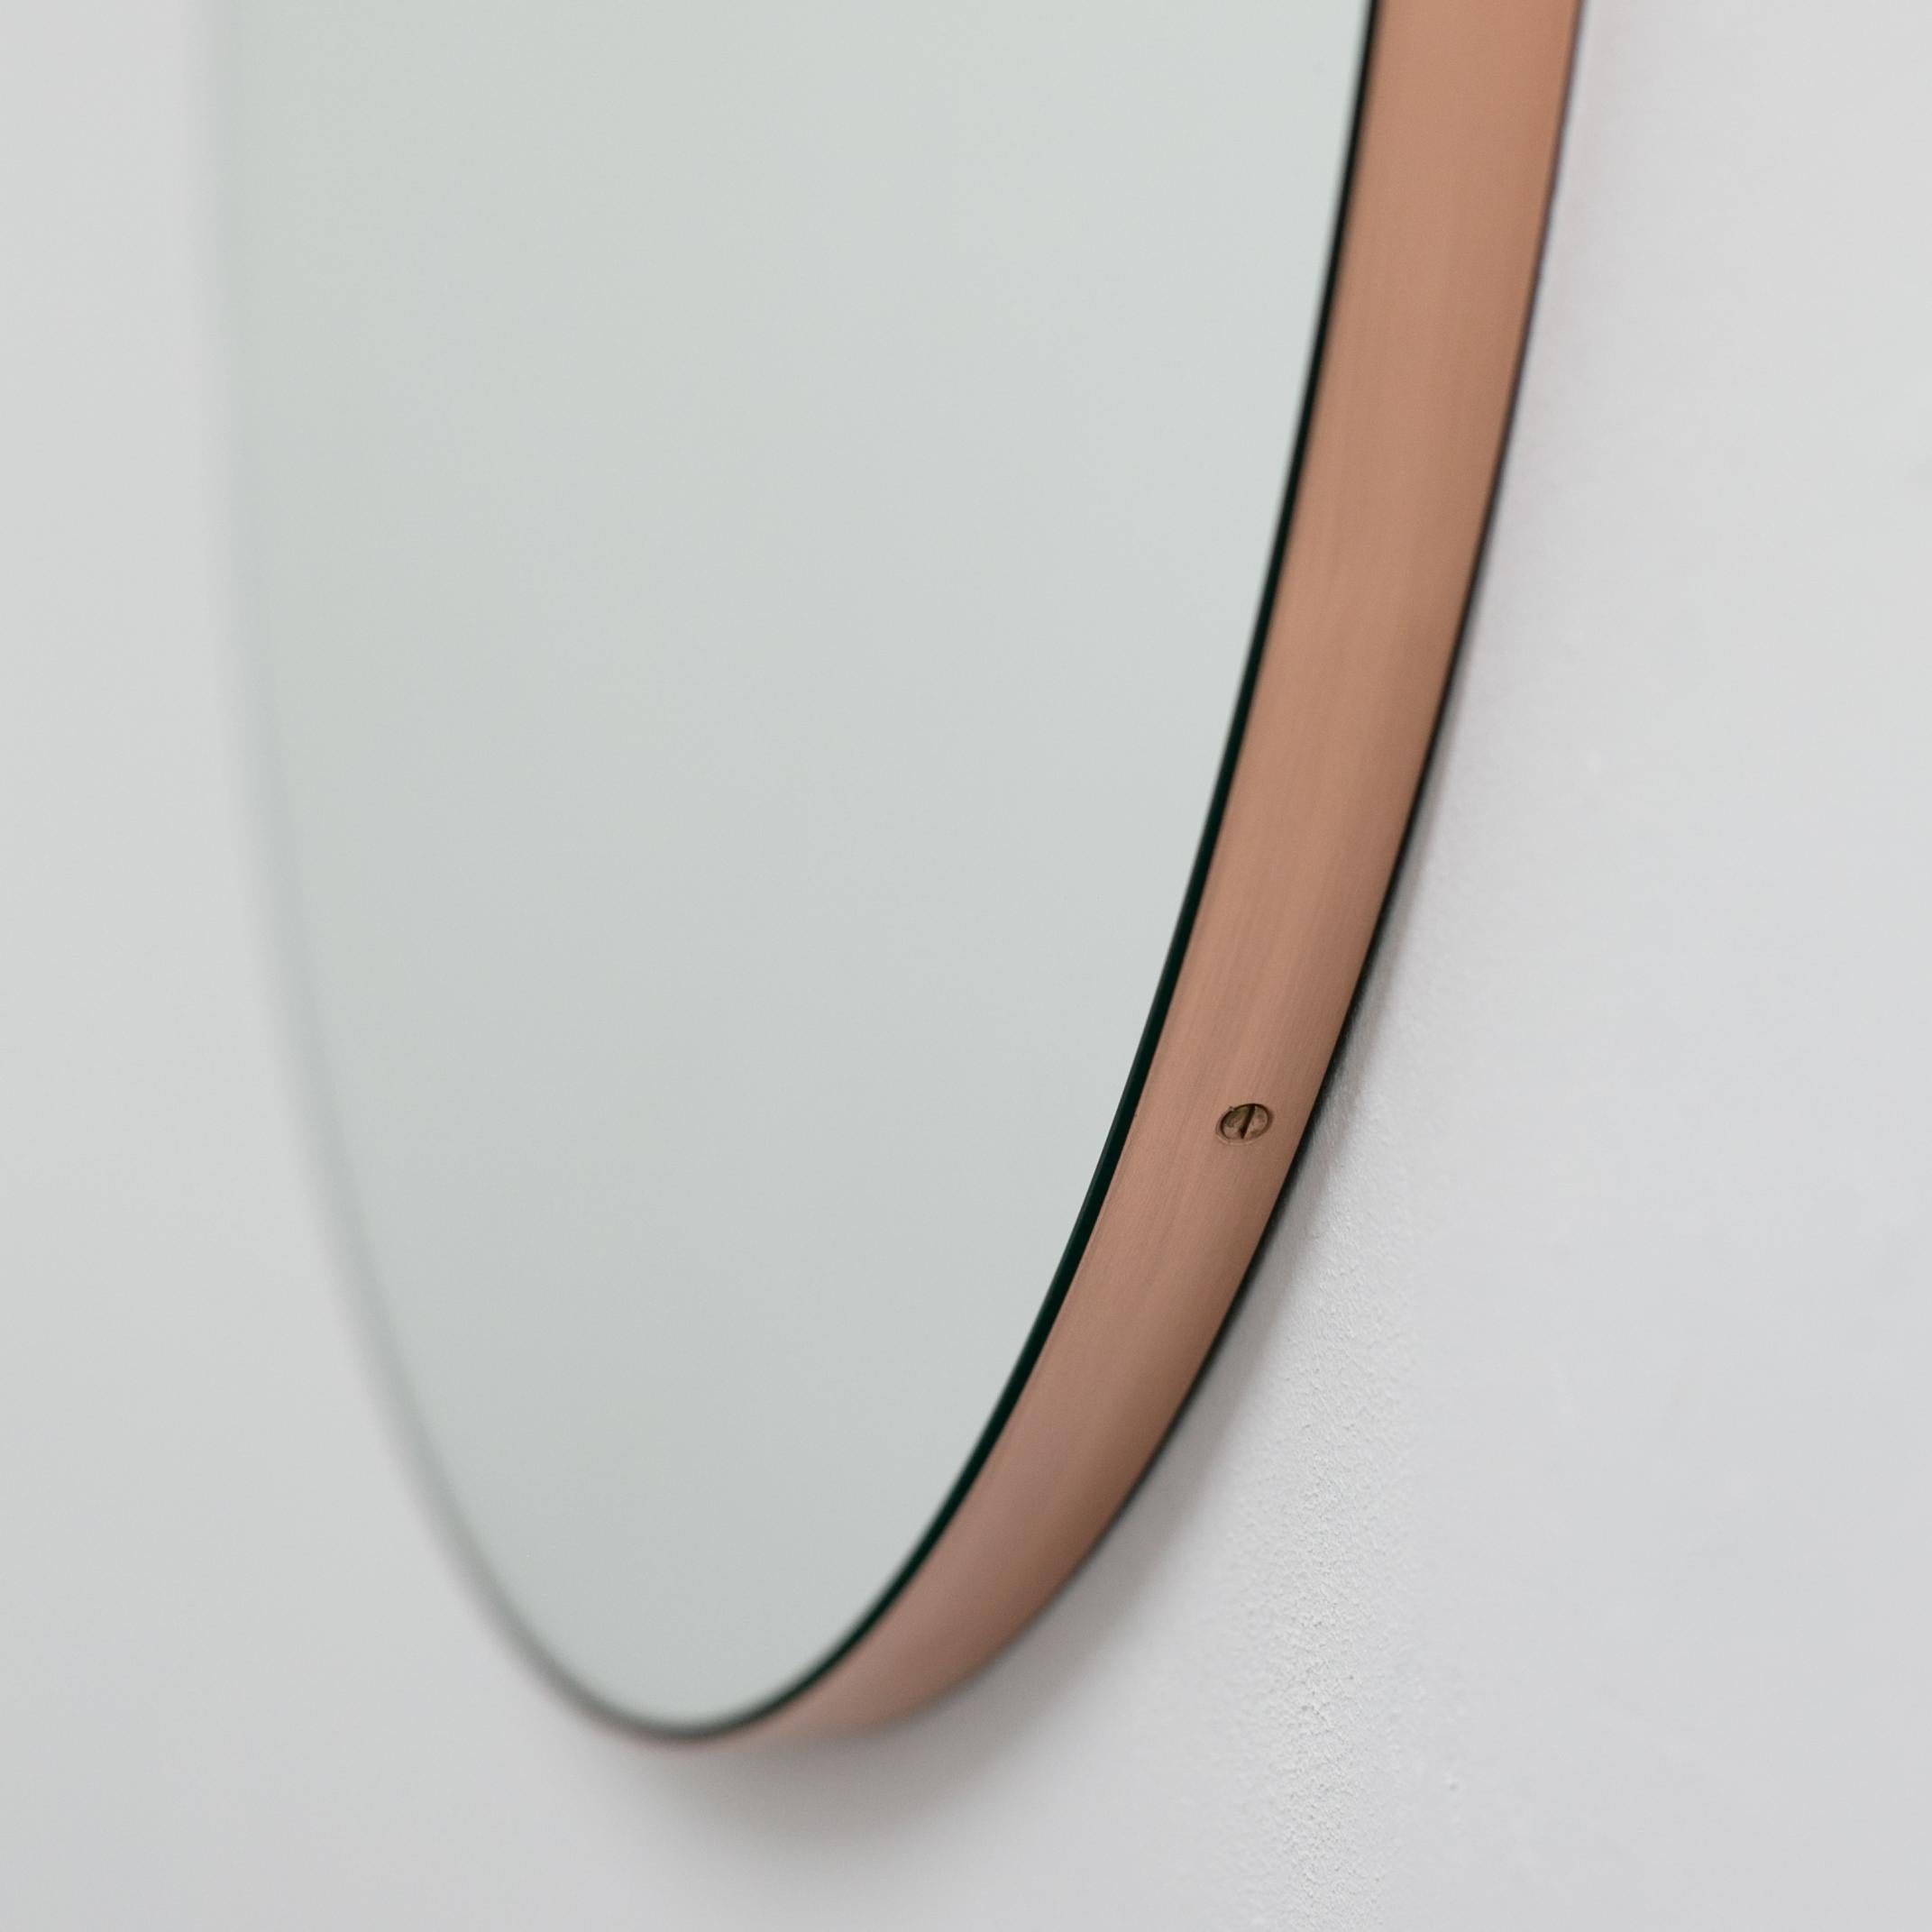 Orbis Round Contemporary Mirror with Copper Frame, Regular For Sale 4